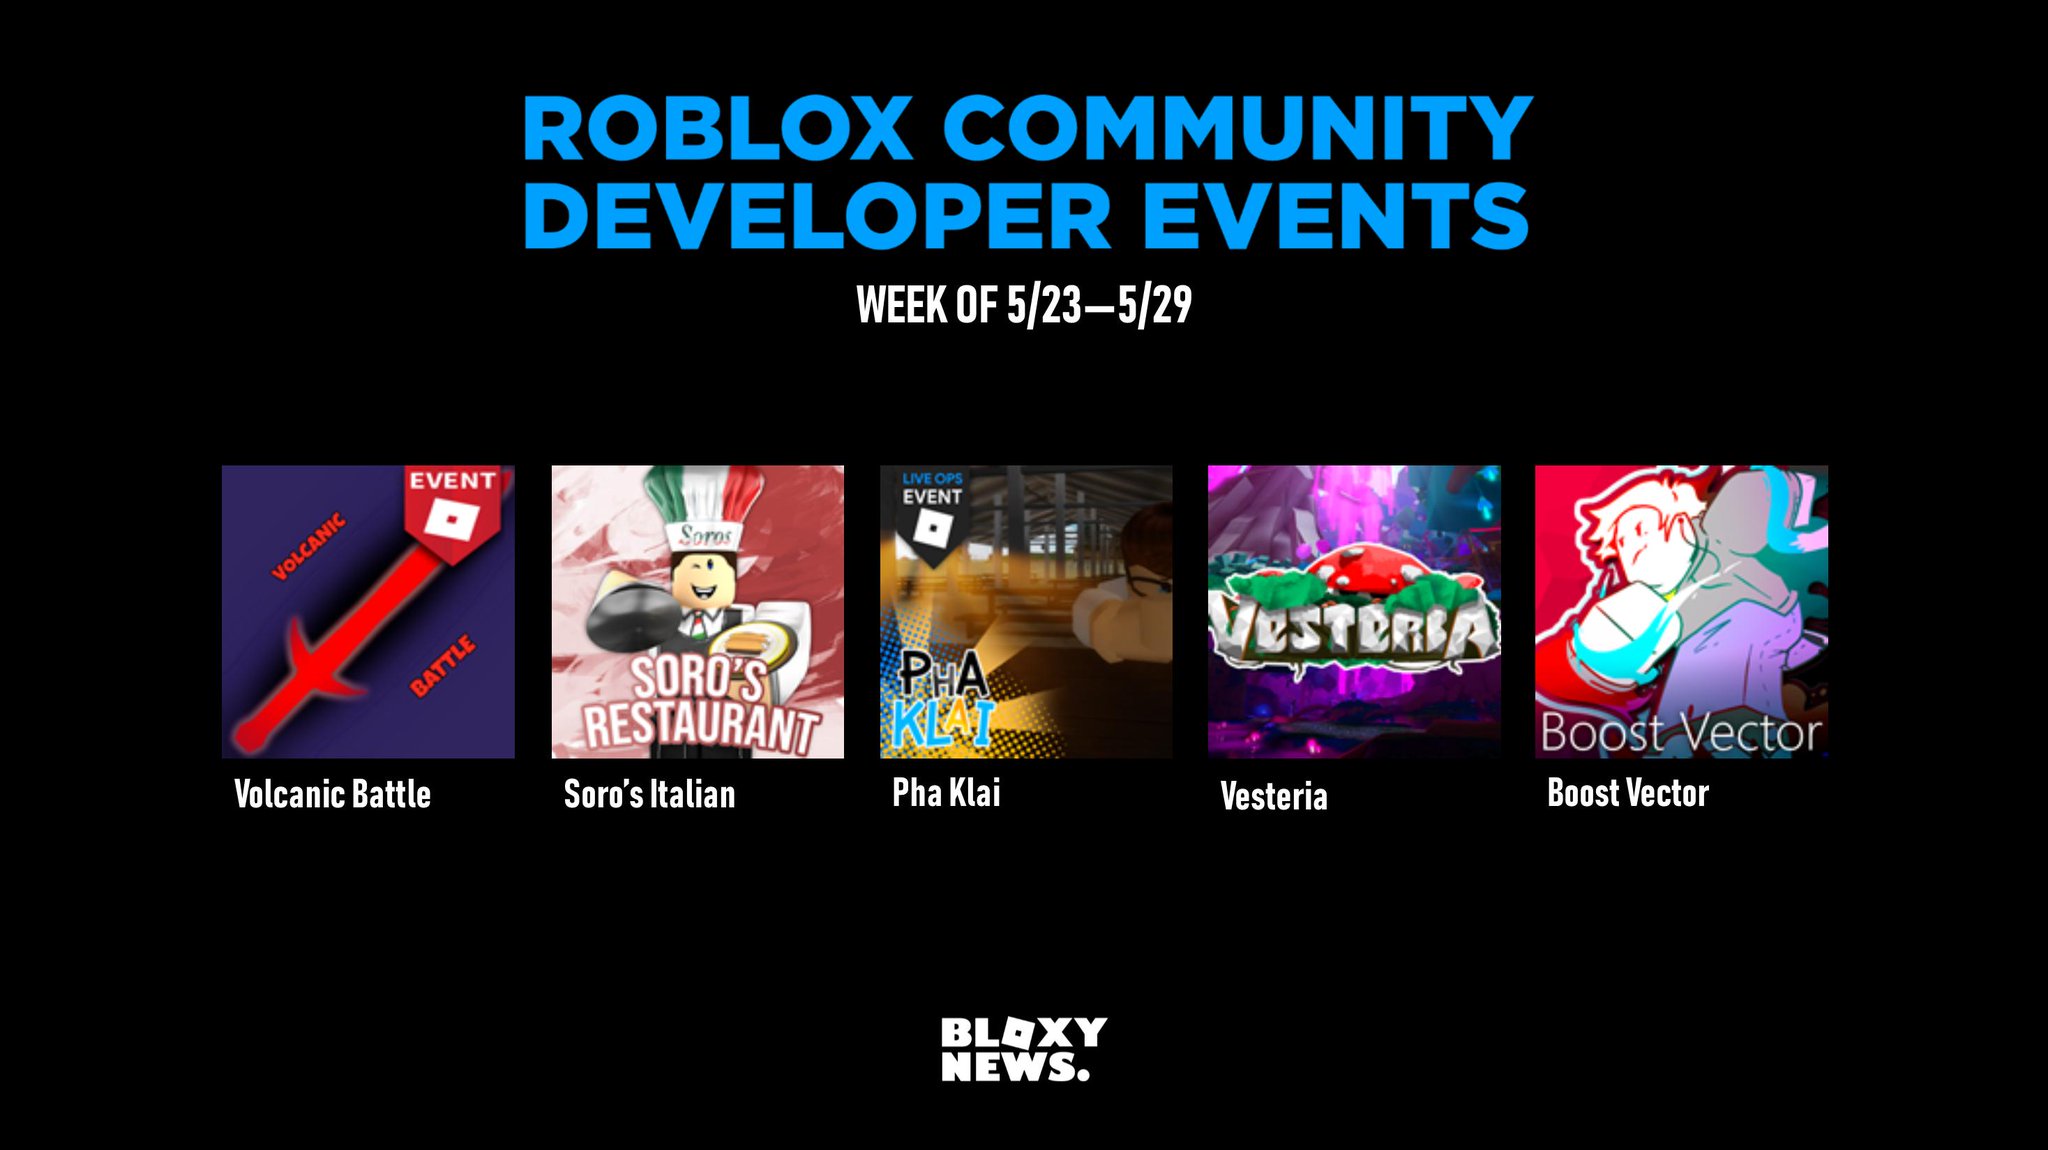 Bloxy News On Twitter Bloxynews This Weeks Robloxdev Live Ops Events Are Live Now Check Out The Quests And Play These Games For Yourselves At Https T Co Hqd8qaf6sw Https T Co Jvixyqj4qq - liveops roblox